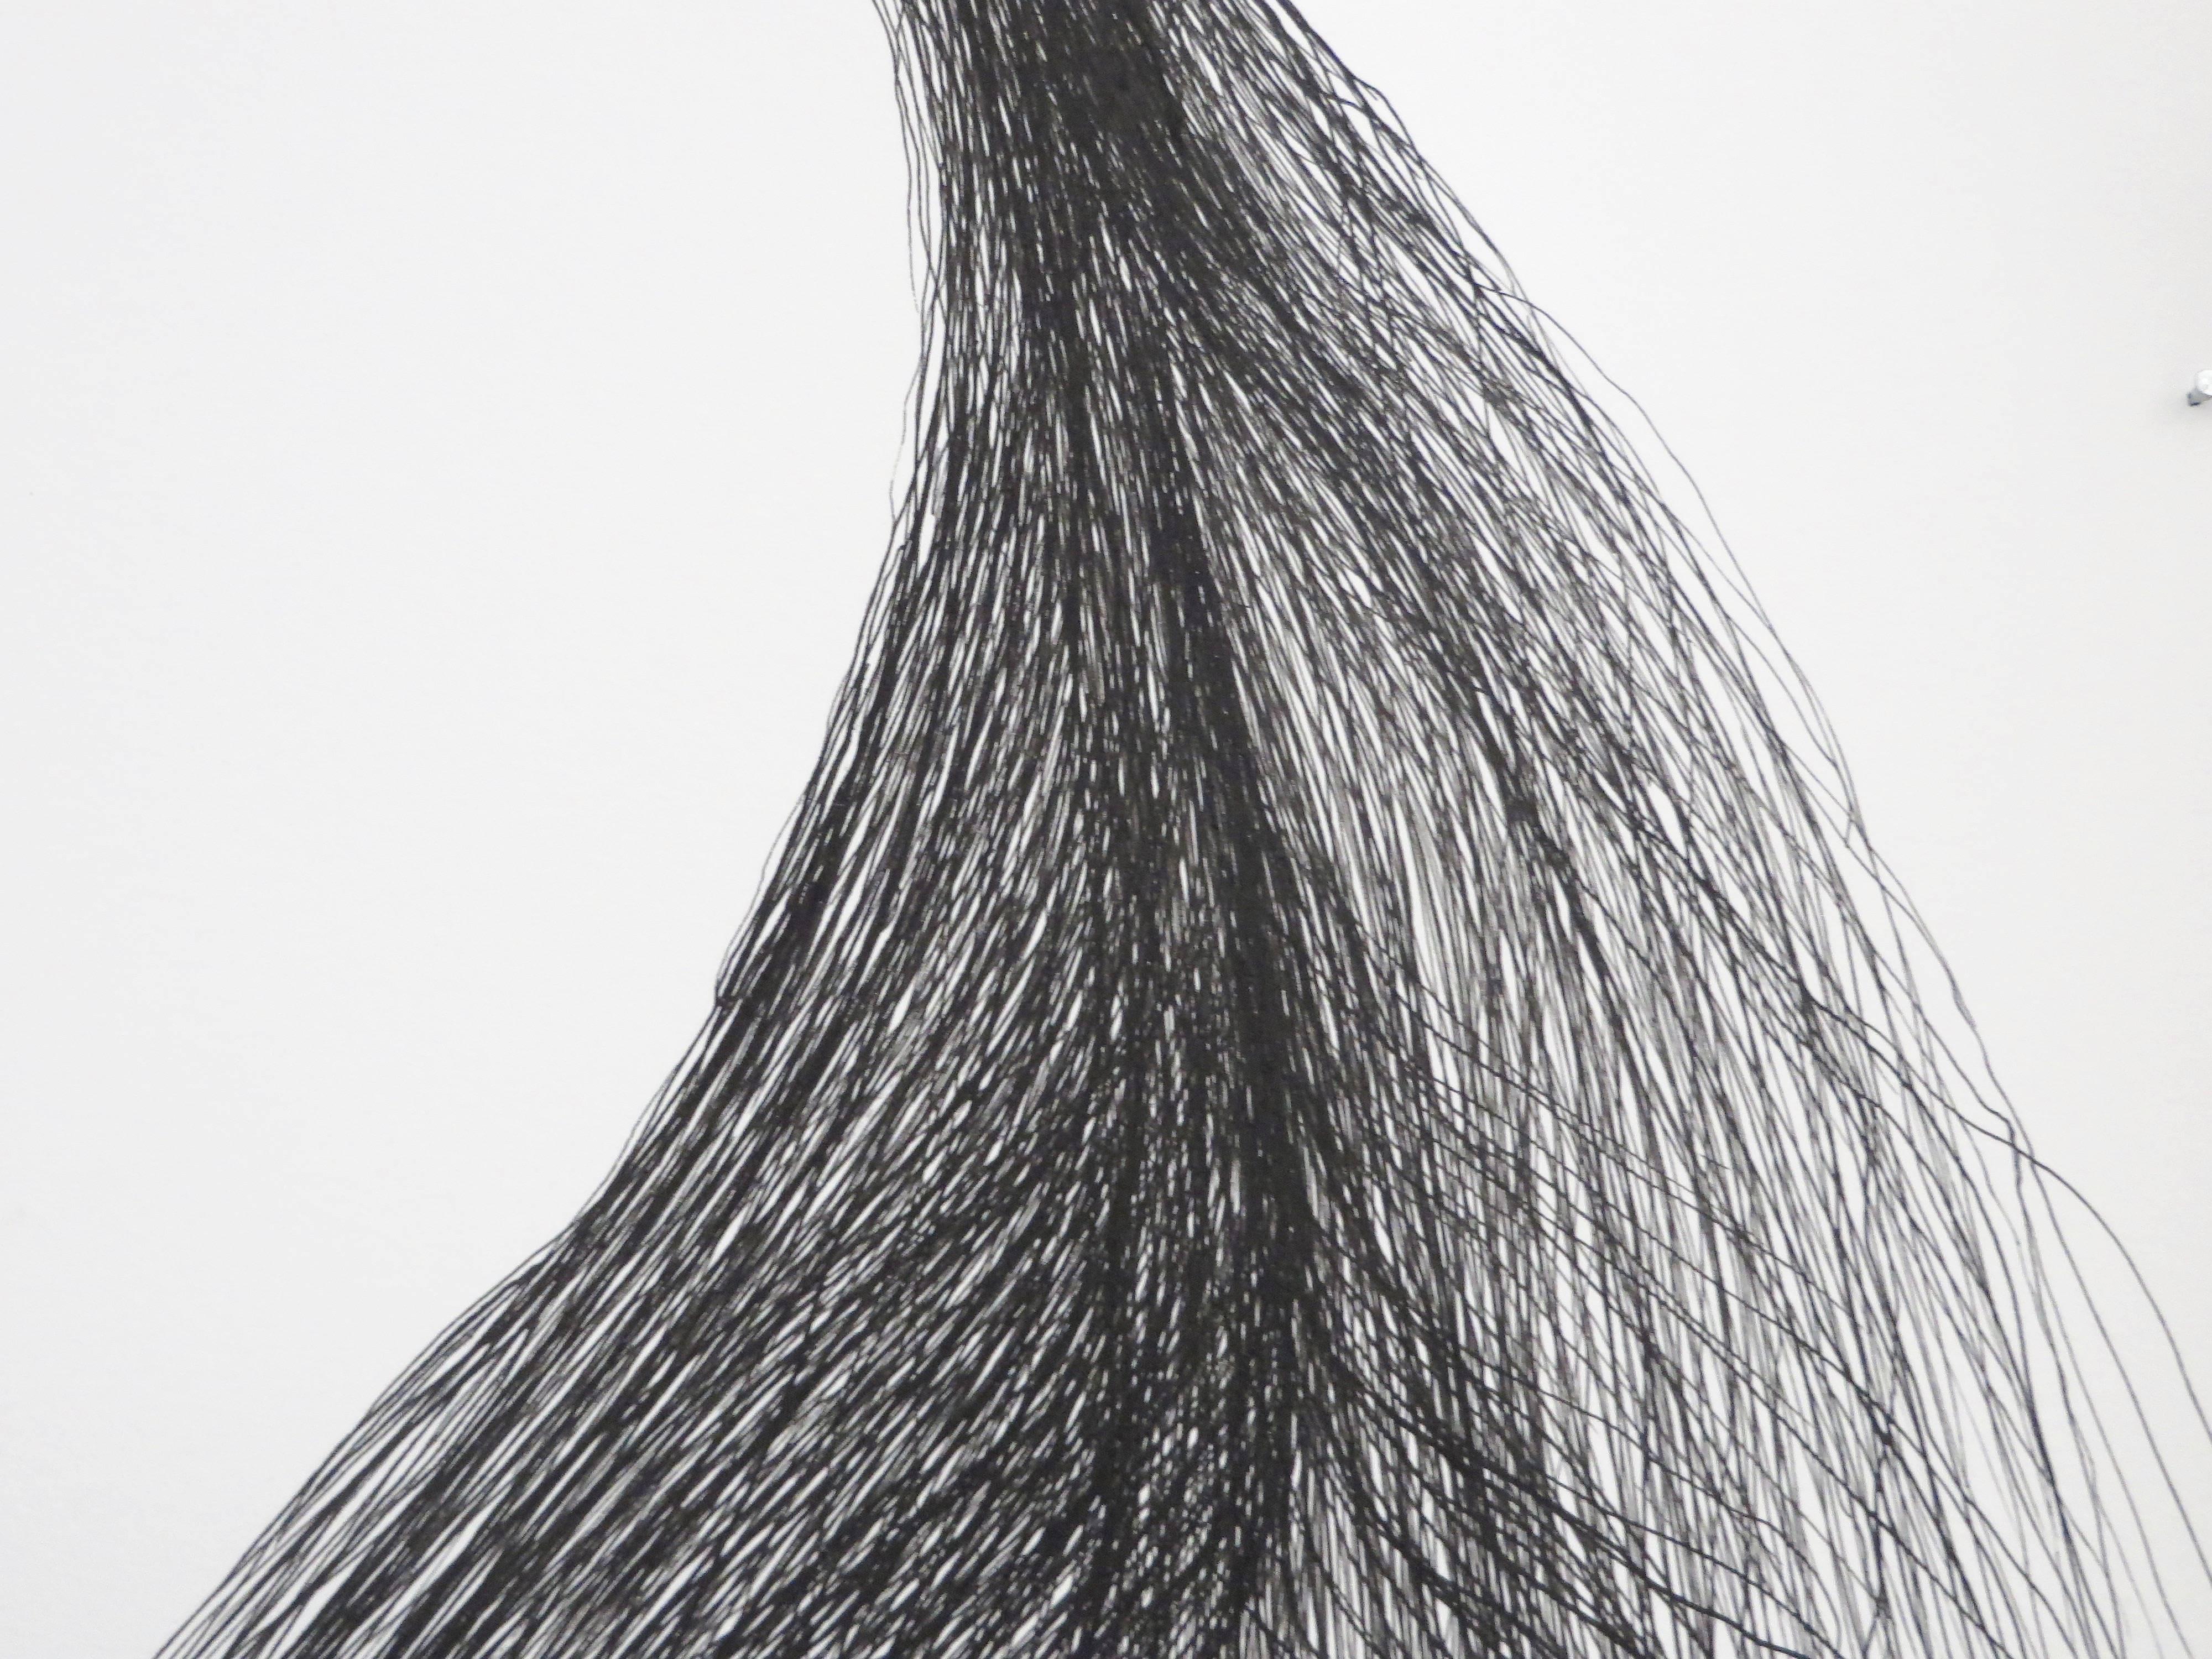 Contemporary India Ink Drawings on Paper by Lukas Machnik